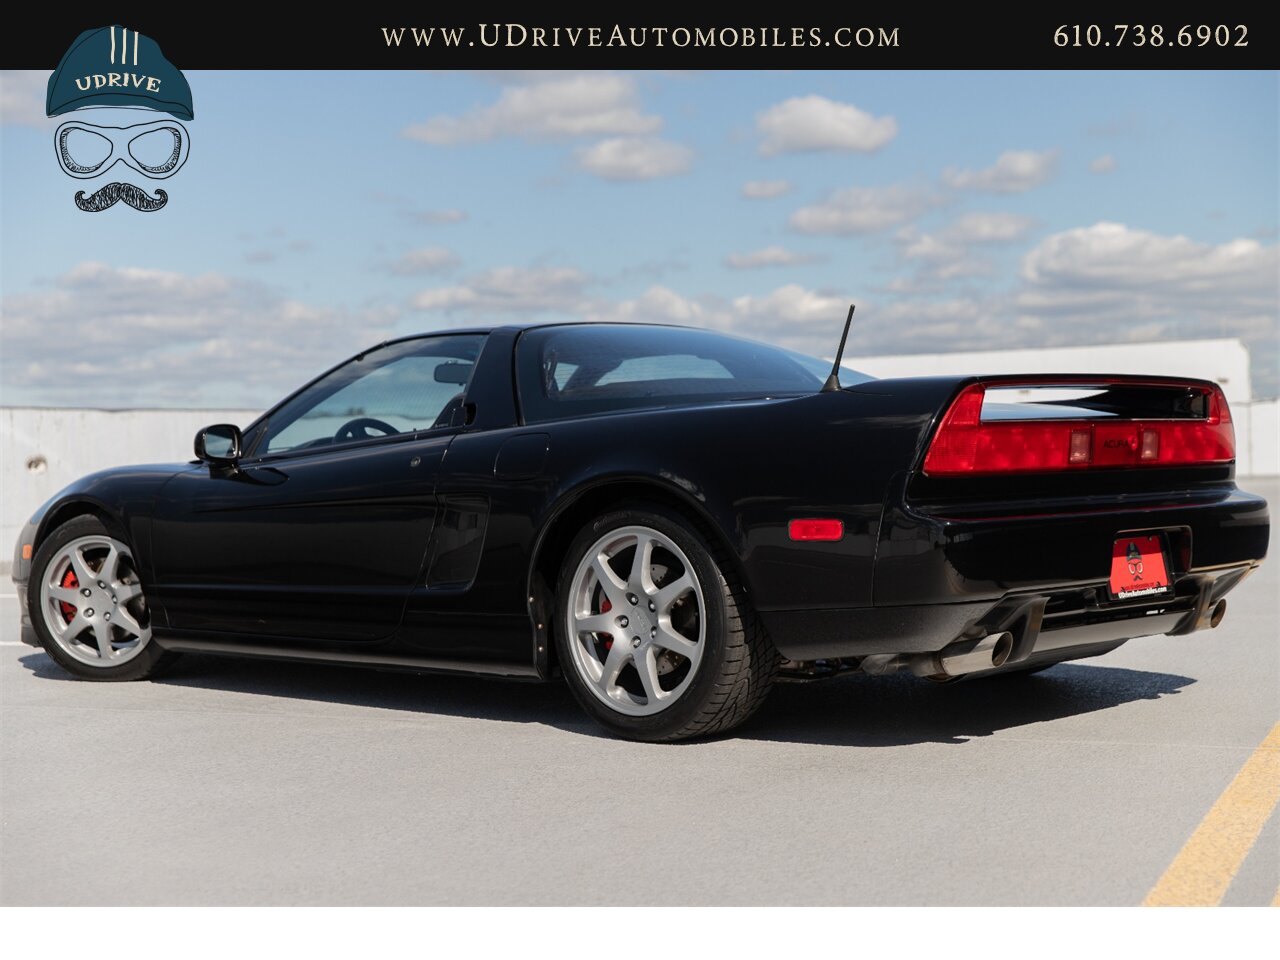 1996 Acura NSX NSX-T  5 Speed Manual Fresh Timing Belt Service - Photo 5 - West Chester, PA 19382